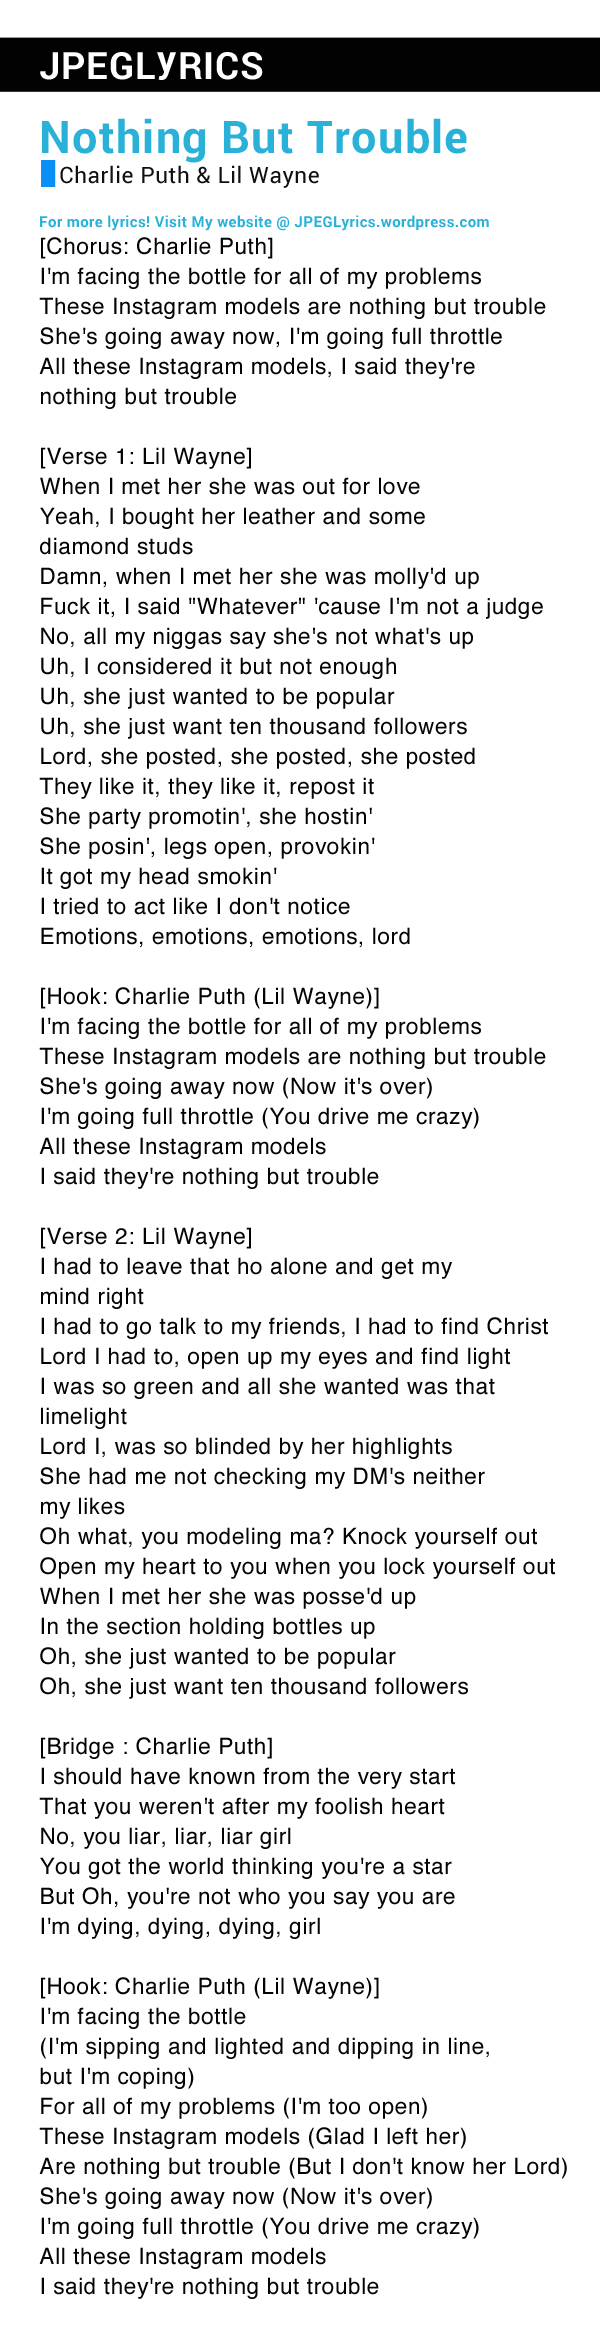 Nothing But Trouble By Lil Wayne & Charlie Puth Lyrics